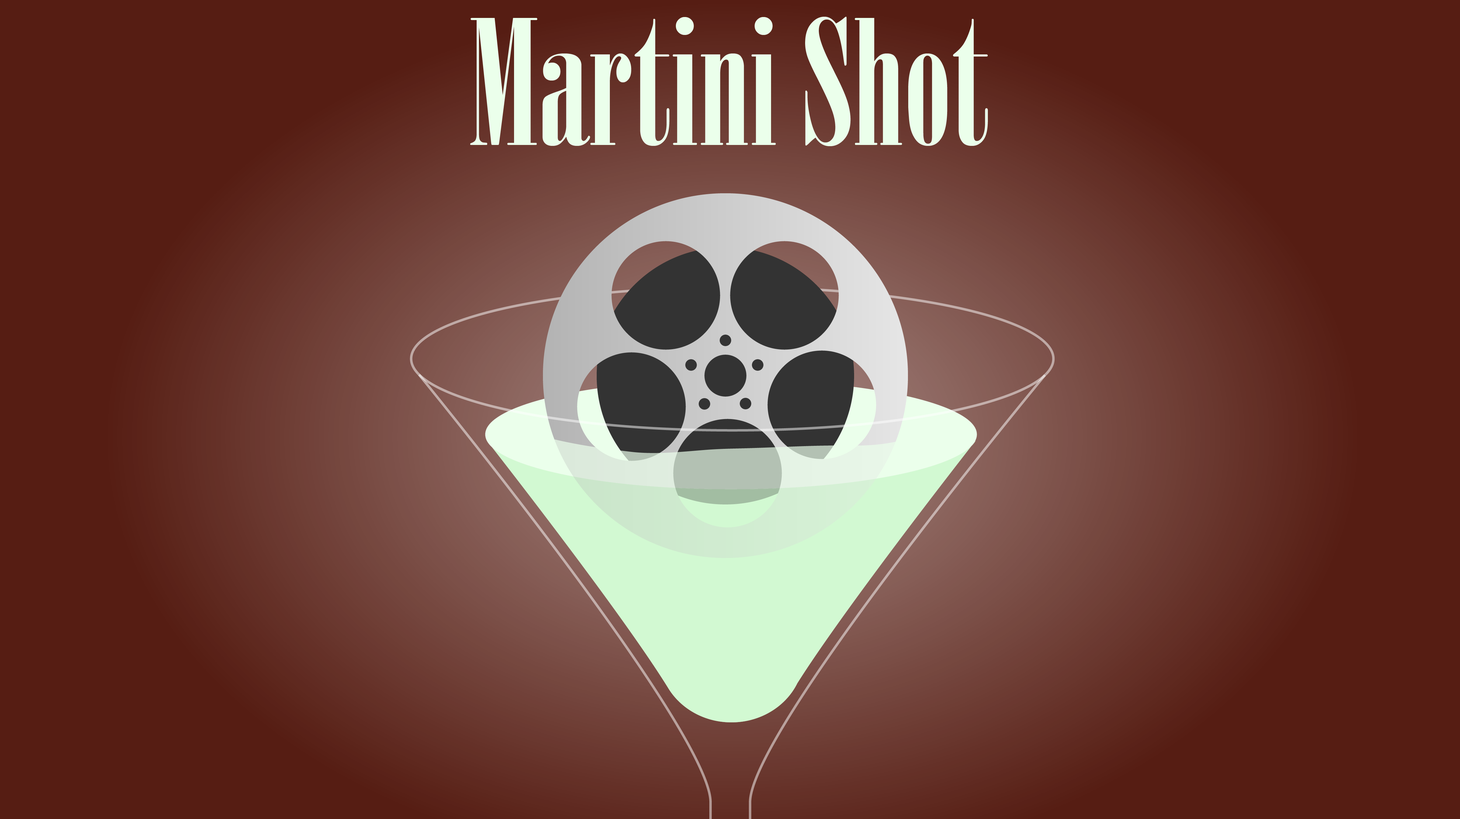 On today’s Martini Shot, Rob tries to limit himself to saying things that fit the following criteria: Is it true, is it kind, and is it necessary. It’s a very short Martini Shot.